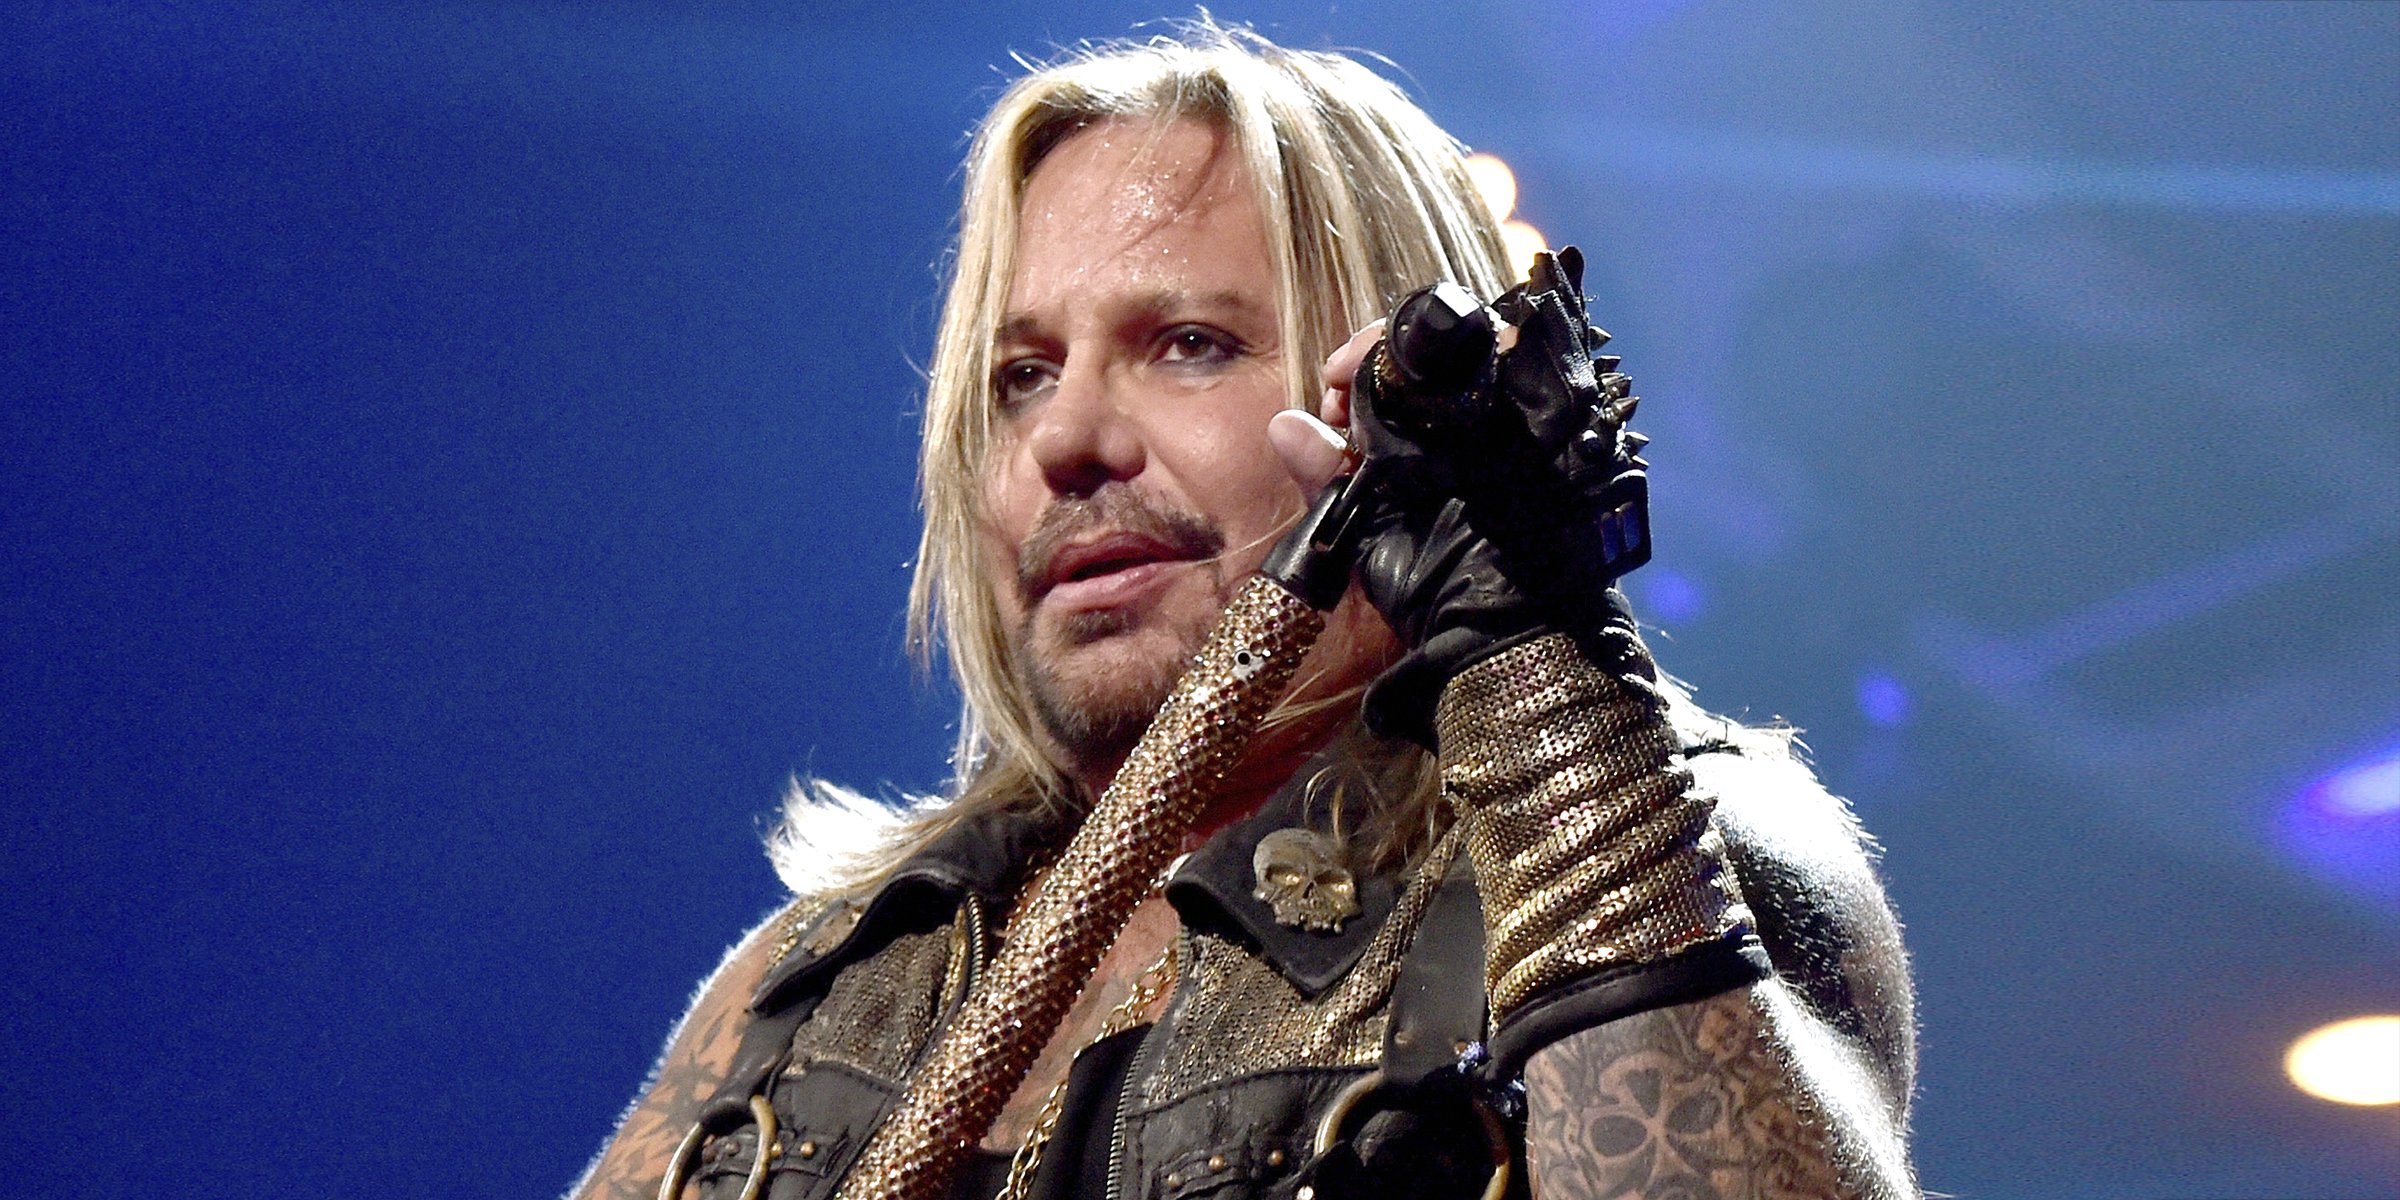 Vince Neil Performing on Stage | Source: Getty Images